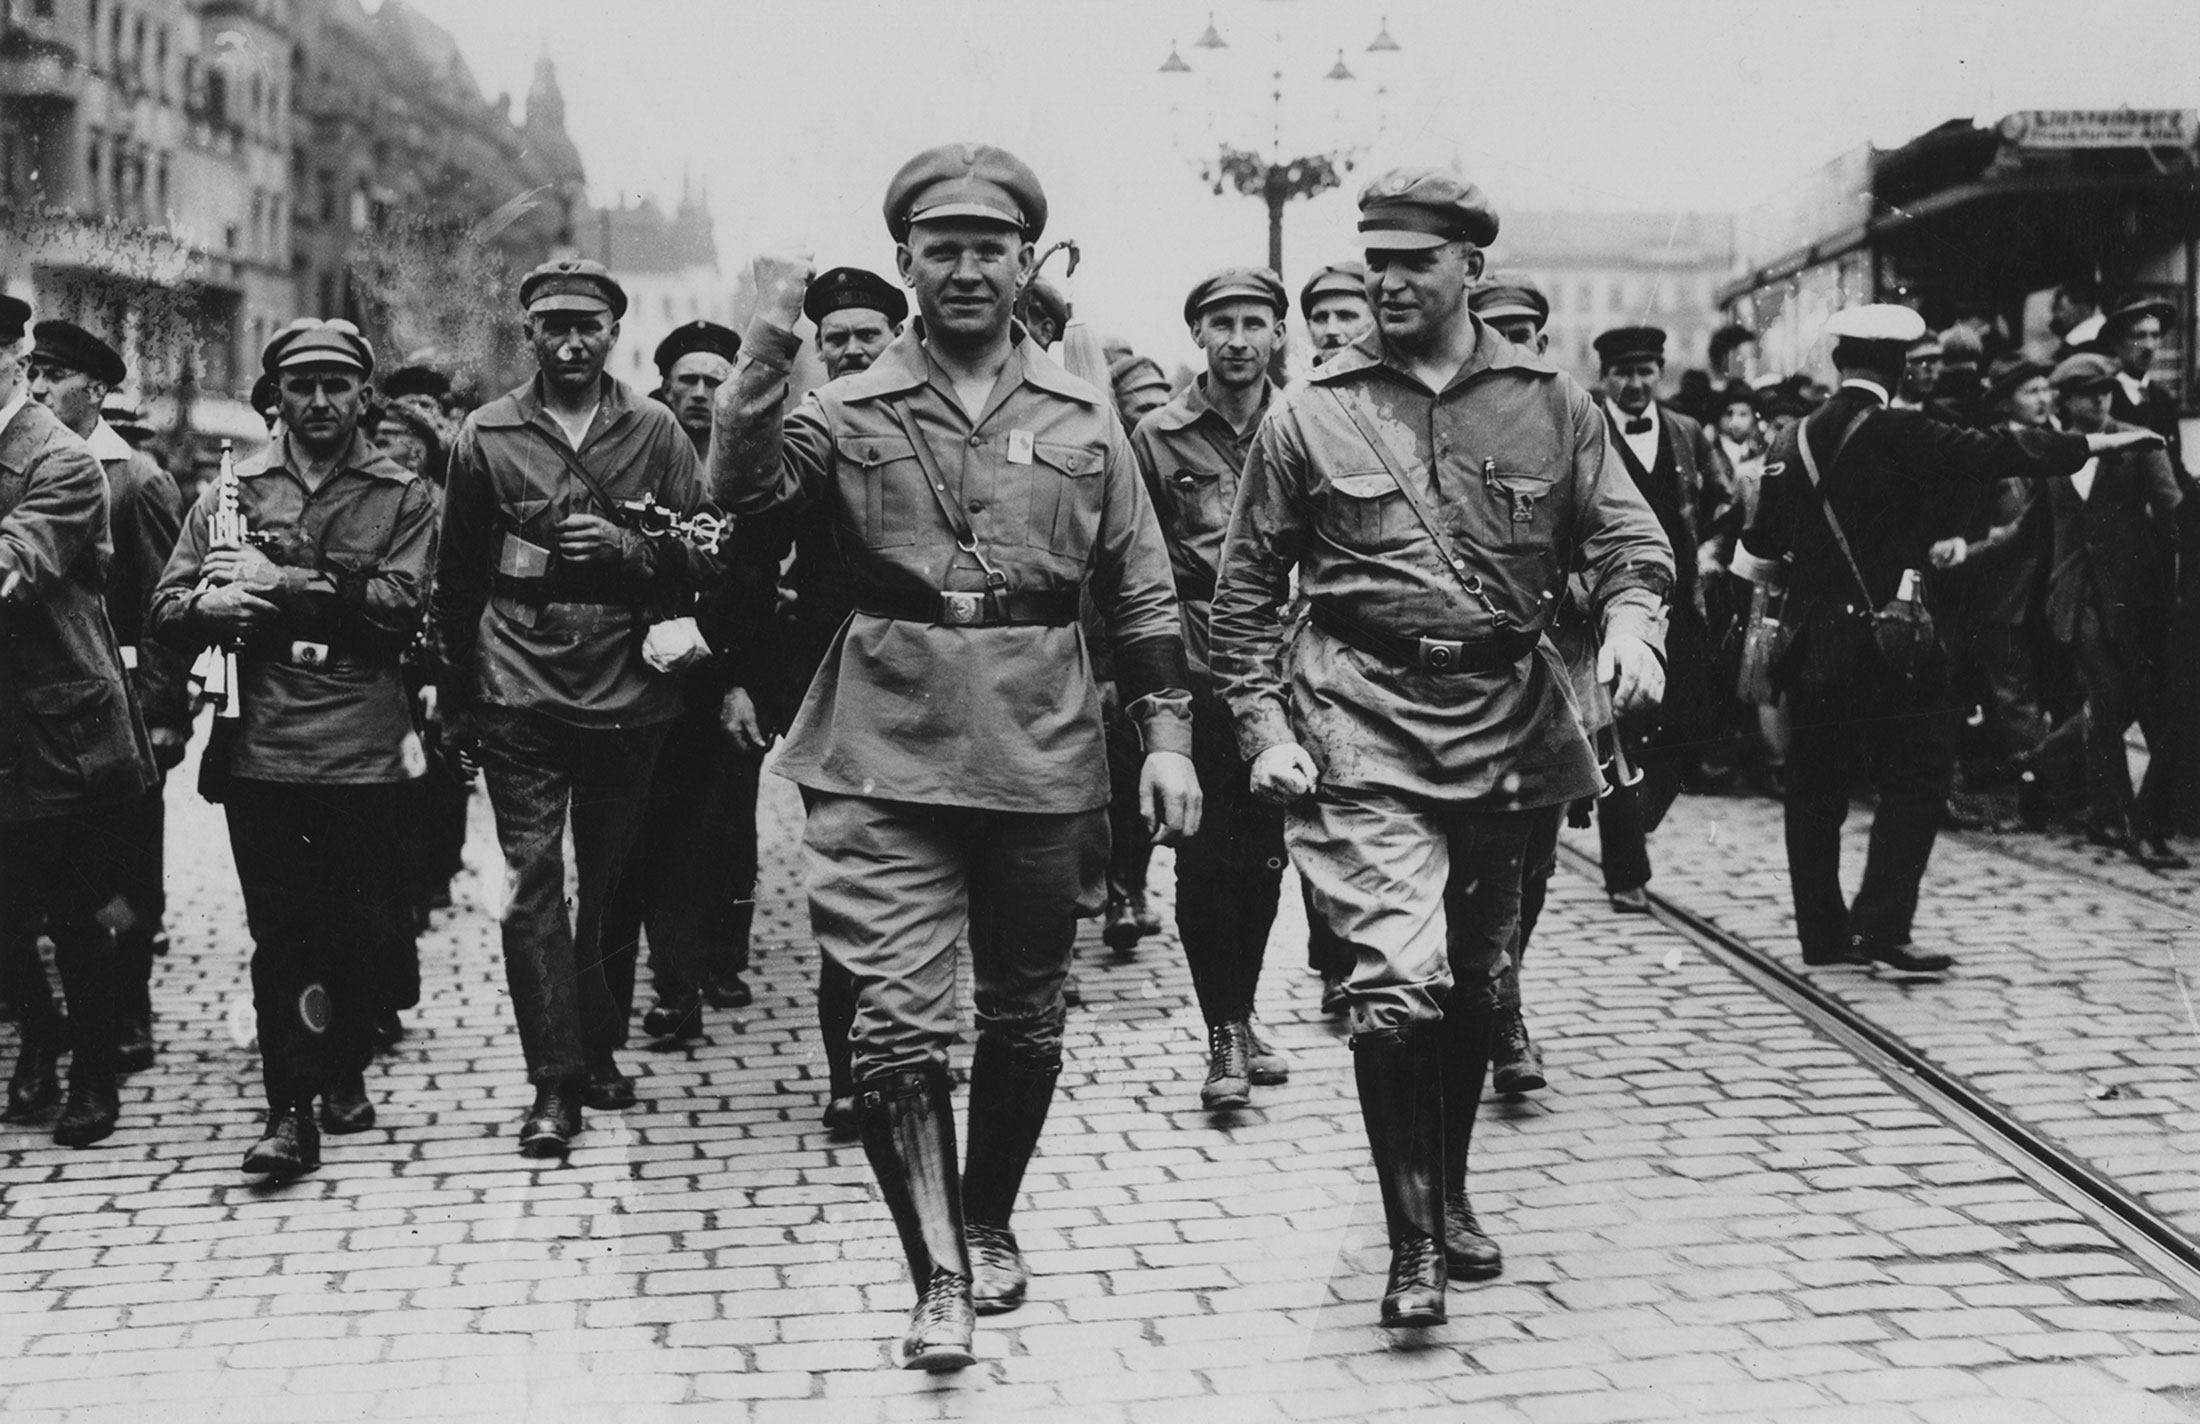 Ernst Thälmann (centre) at a march of the Red Front Fighters‘ League (Roter Frontkämpferbund, RFB) in Berlin, 1927.